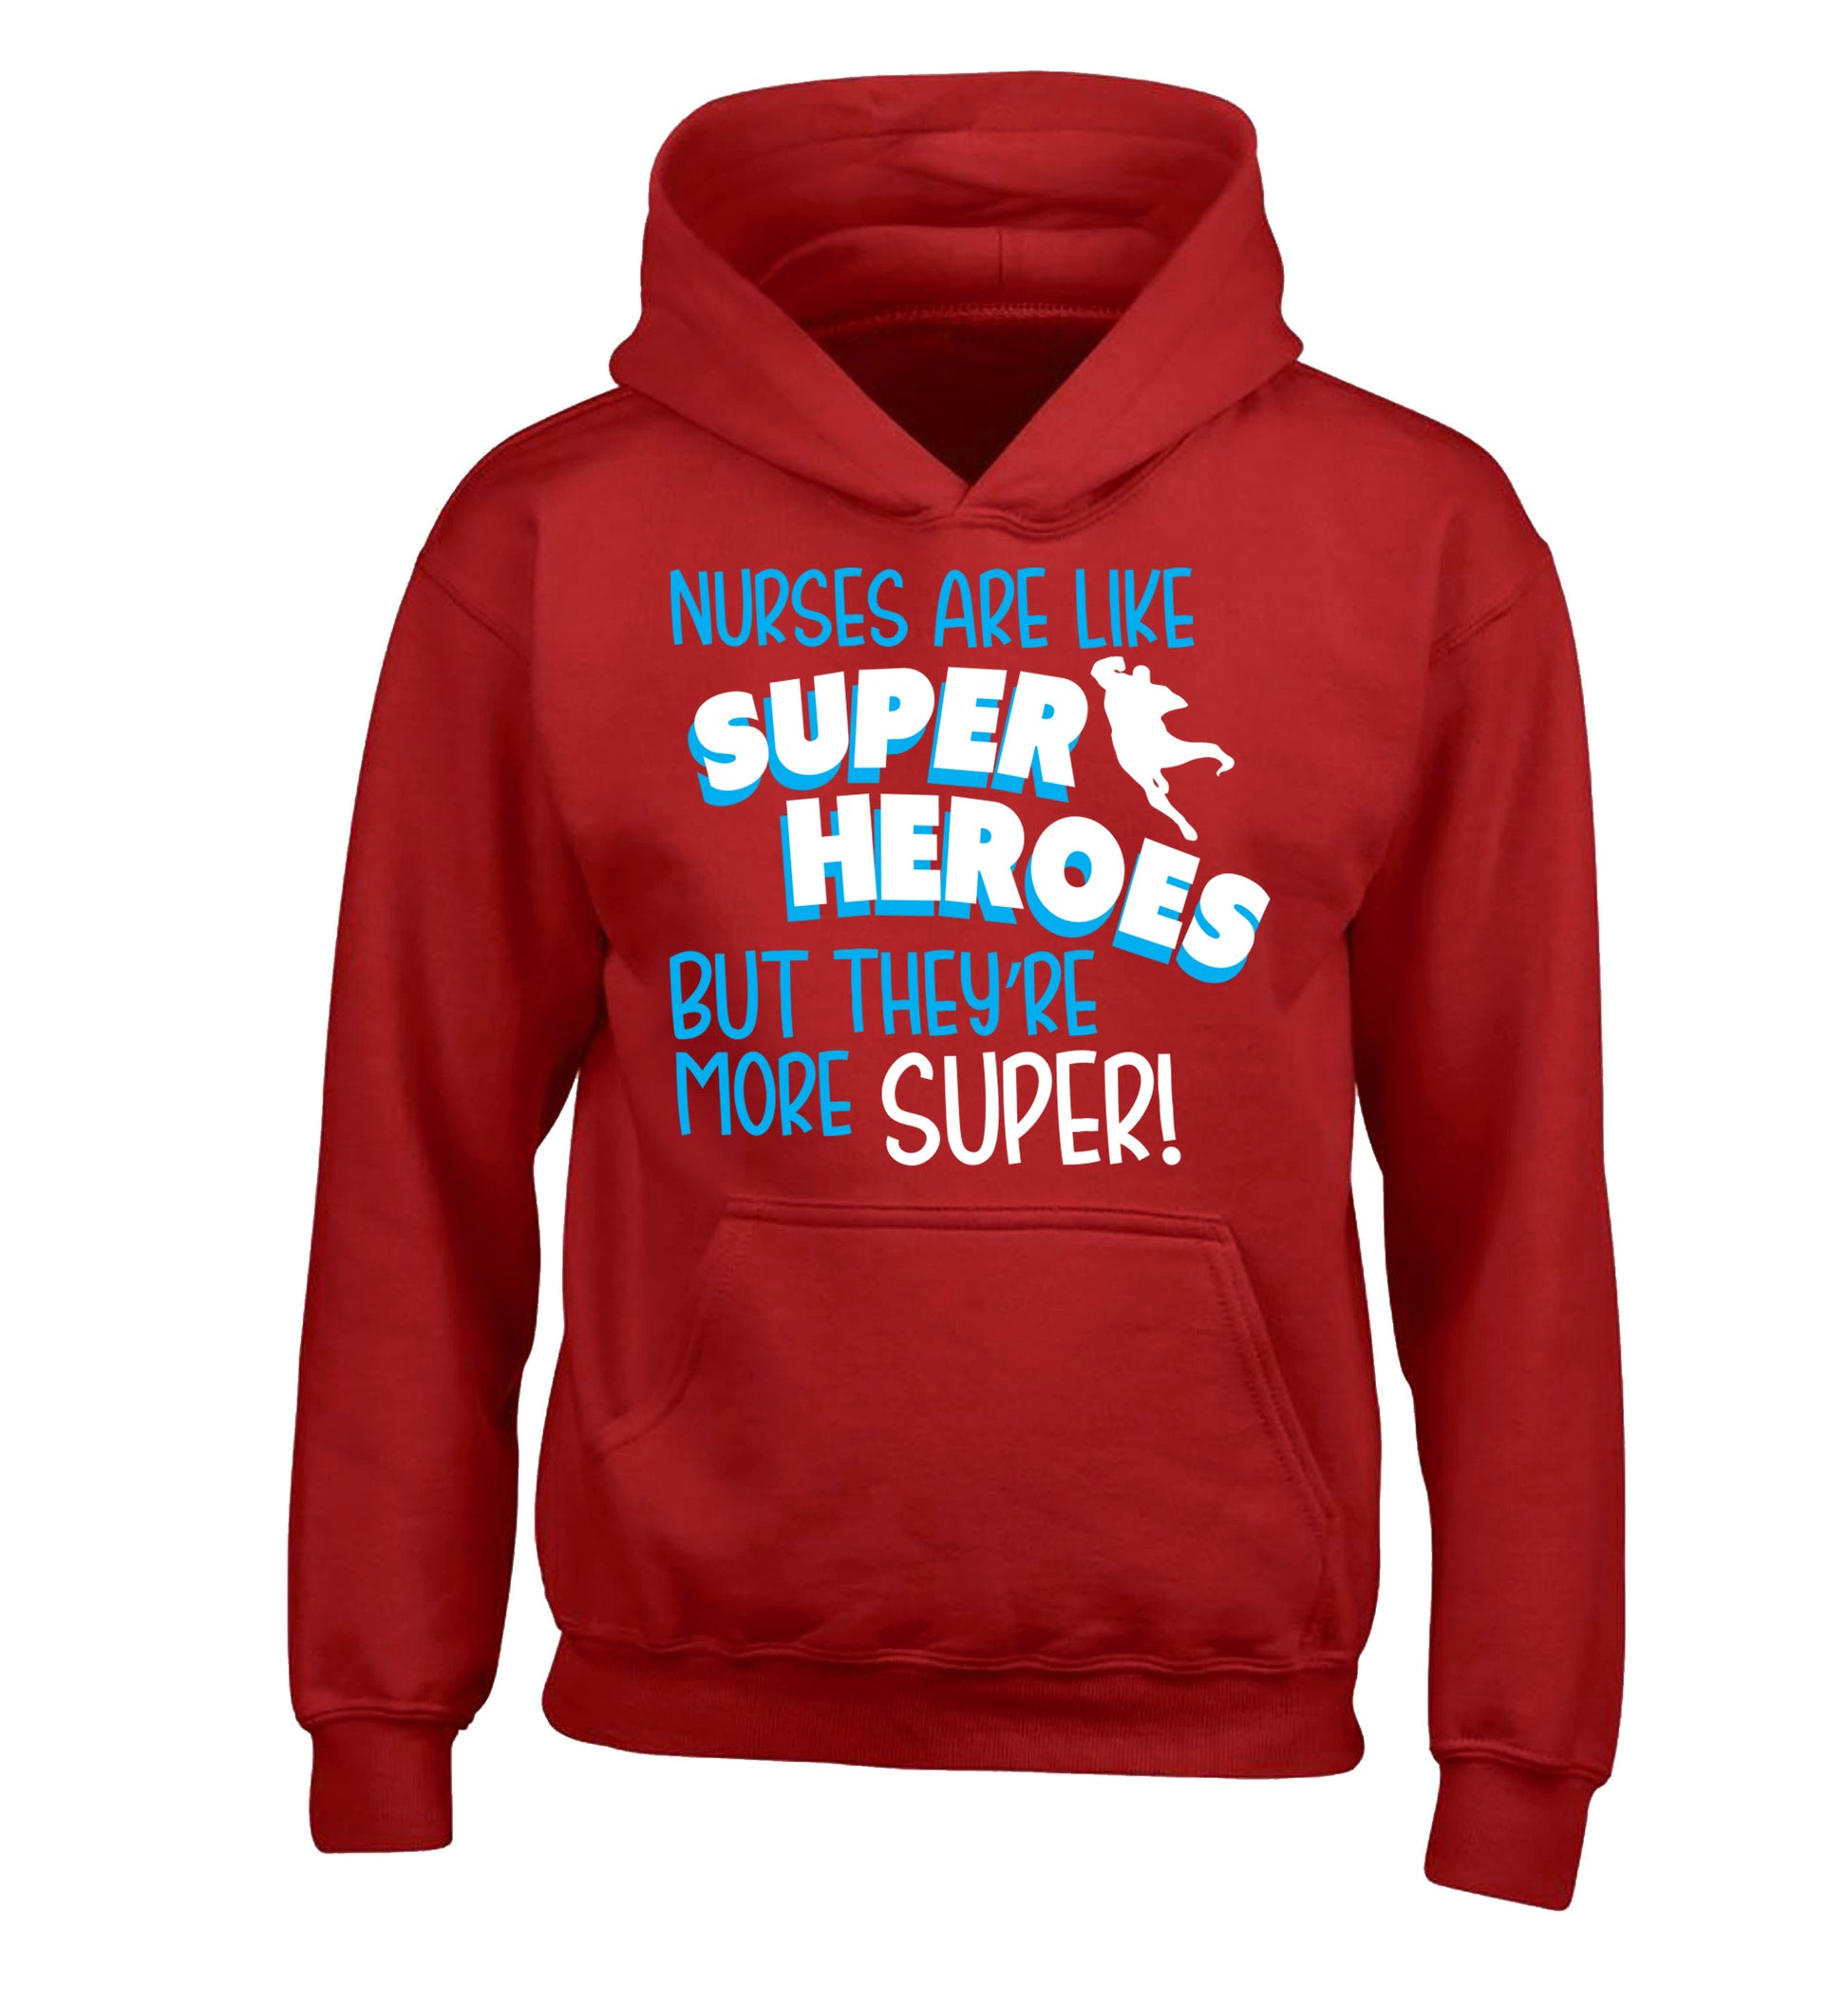 Nurses are like superheros but they're more super children's red hoodie 12-13 Years